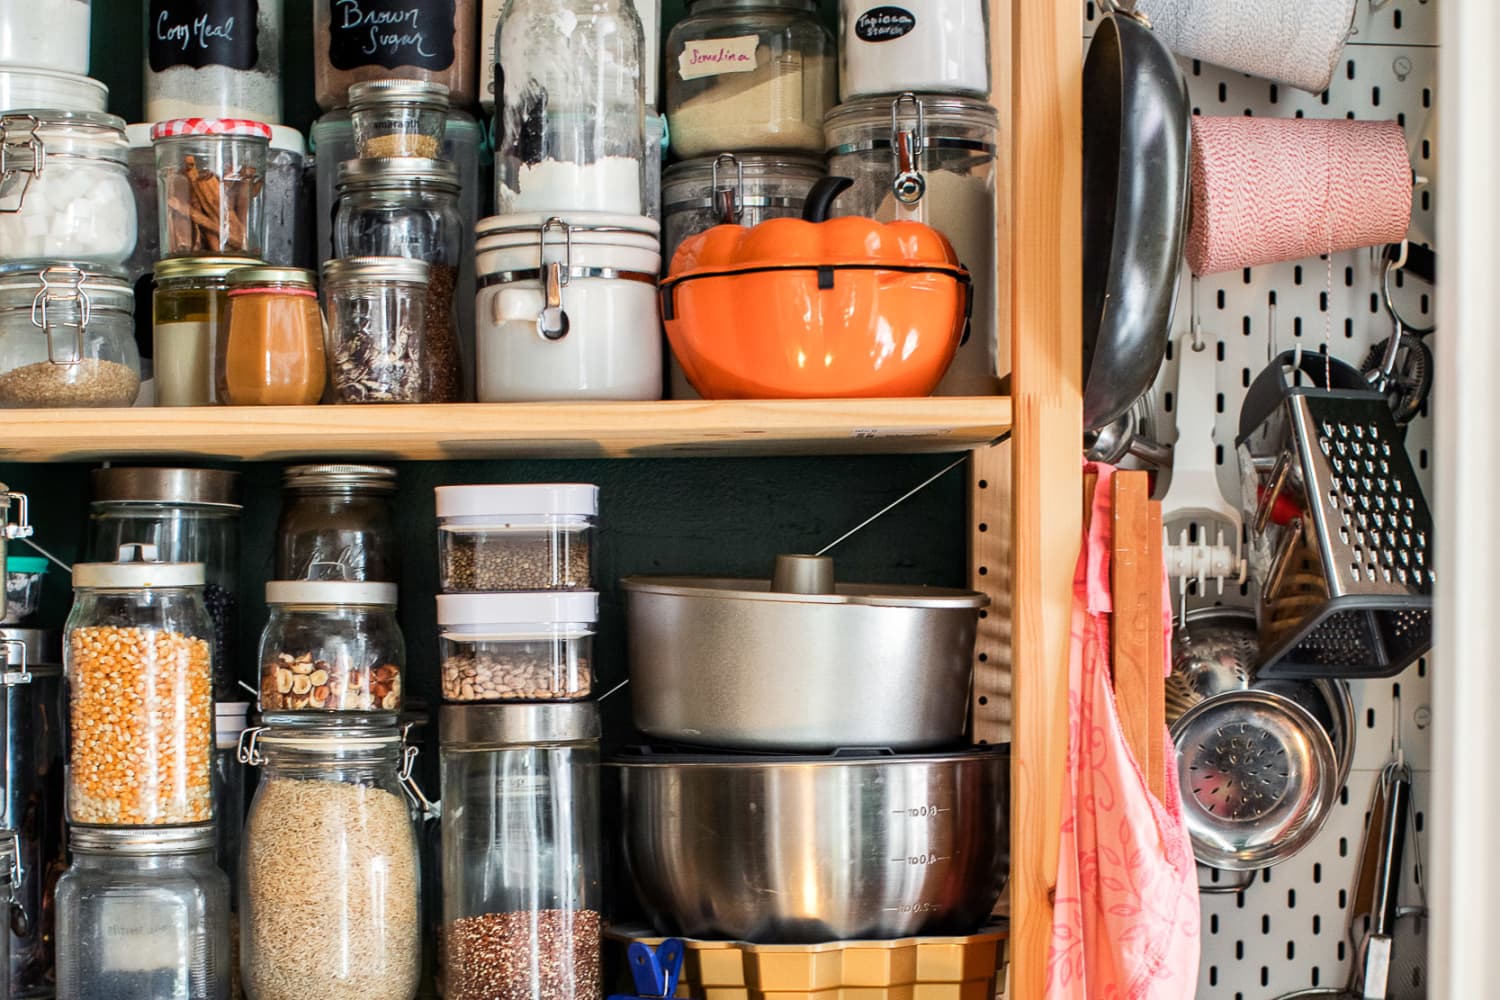 This Restaurant Food Storage Solution Does Wonders in My Home Kitchen